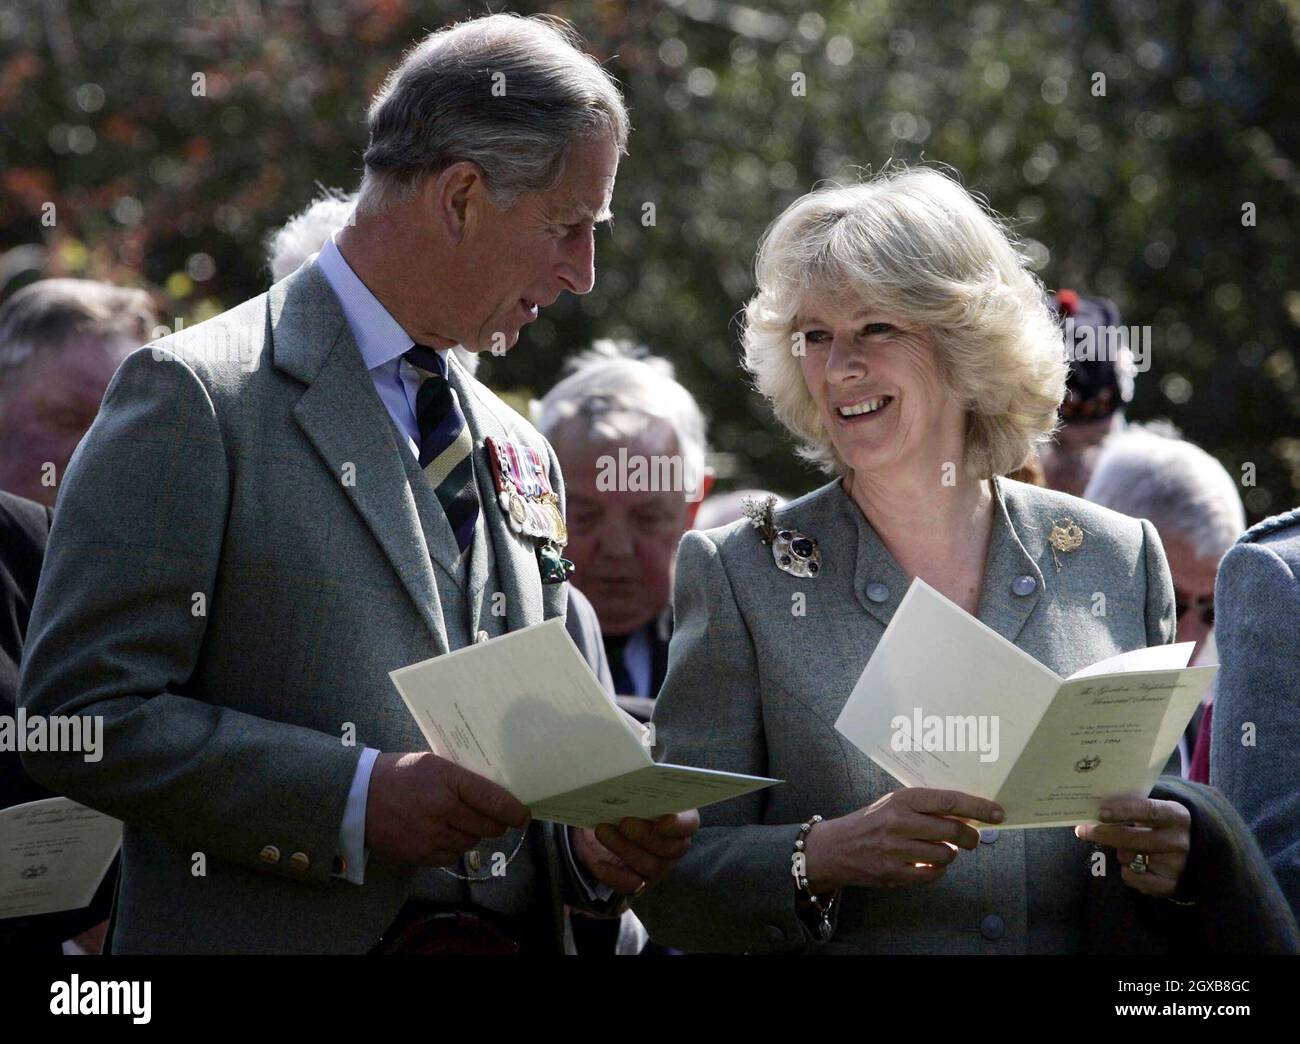 Prince Charles and Camilla Duchess of Cornwall attend a special memorial service to commemorate the lives of soldiers lost during active service at the Gordon Highlanders Regimental museum, Aberdeen, Scotland. Anwar Hussein/allactiondigital.com  Stock Photo